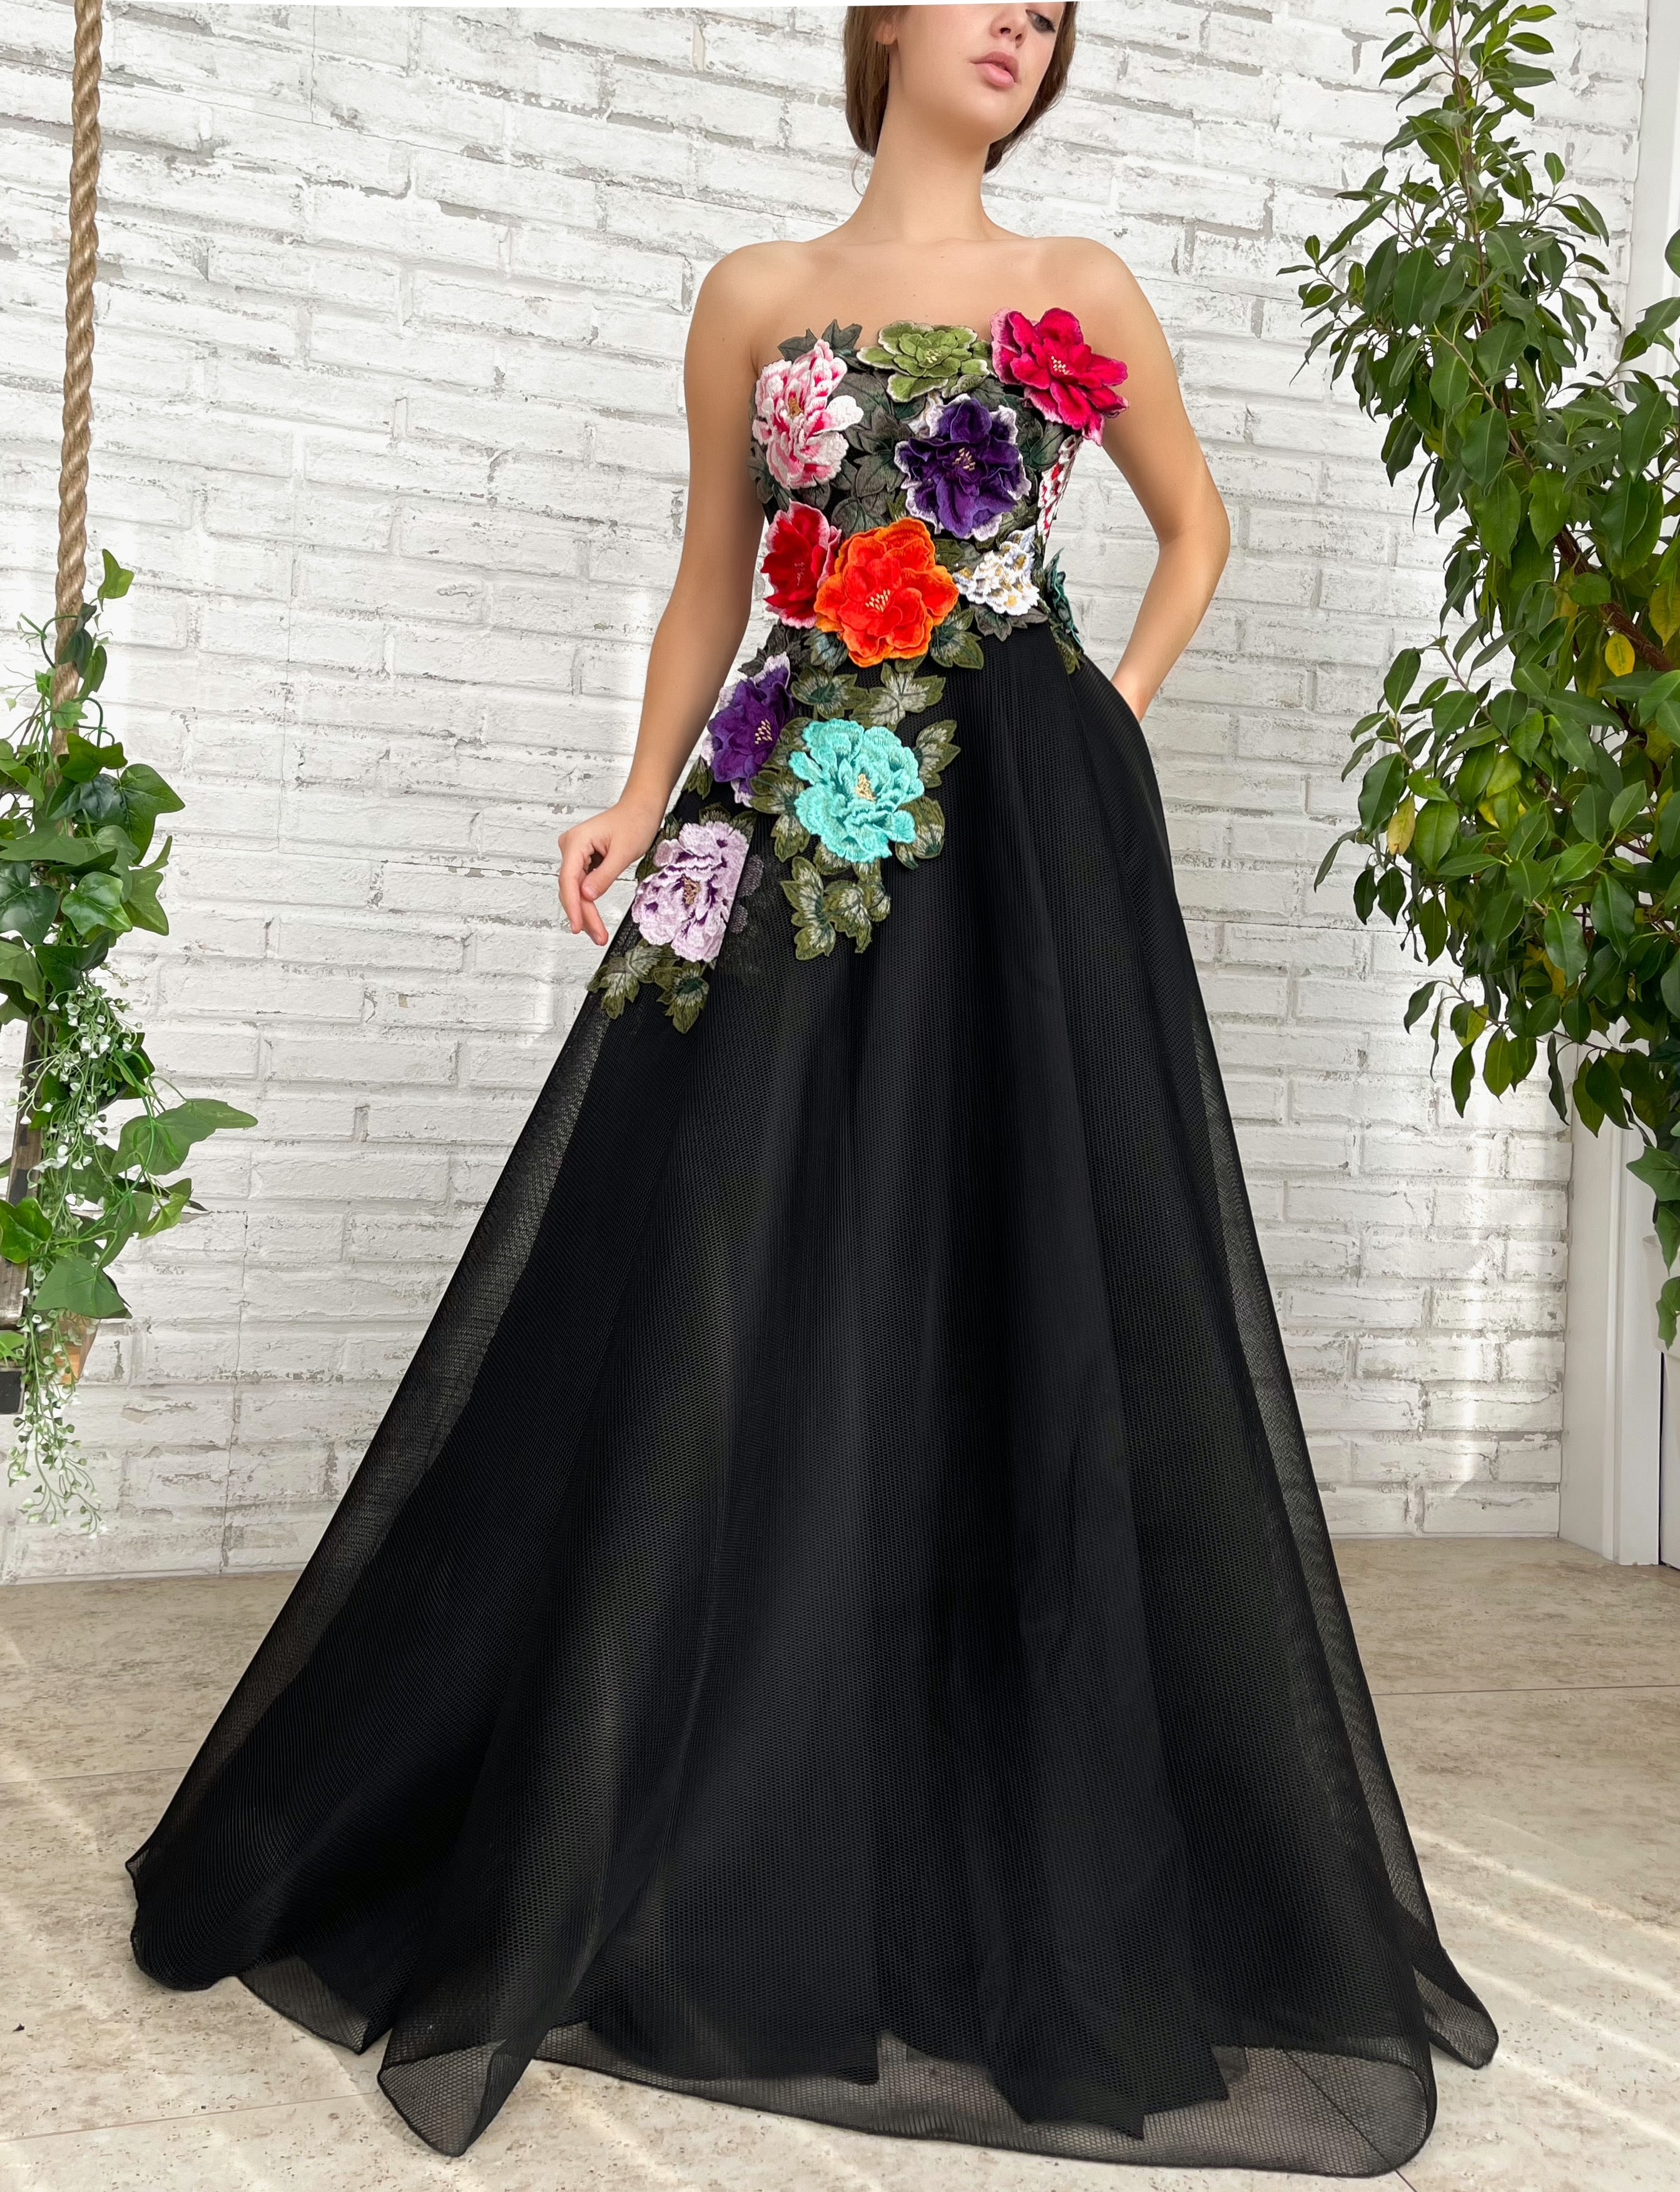 Black A-Line dress with no sleeves and embroidered flowers